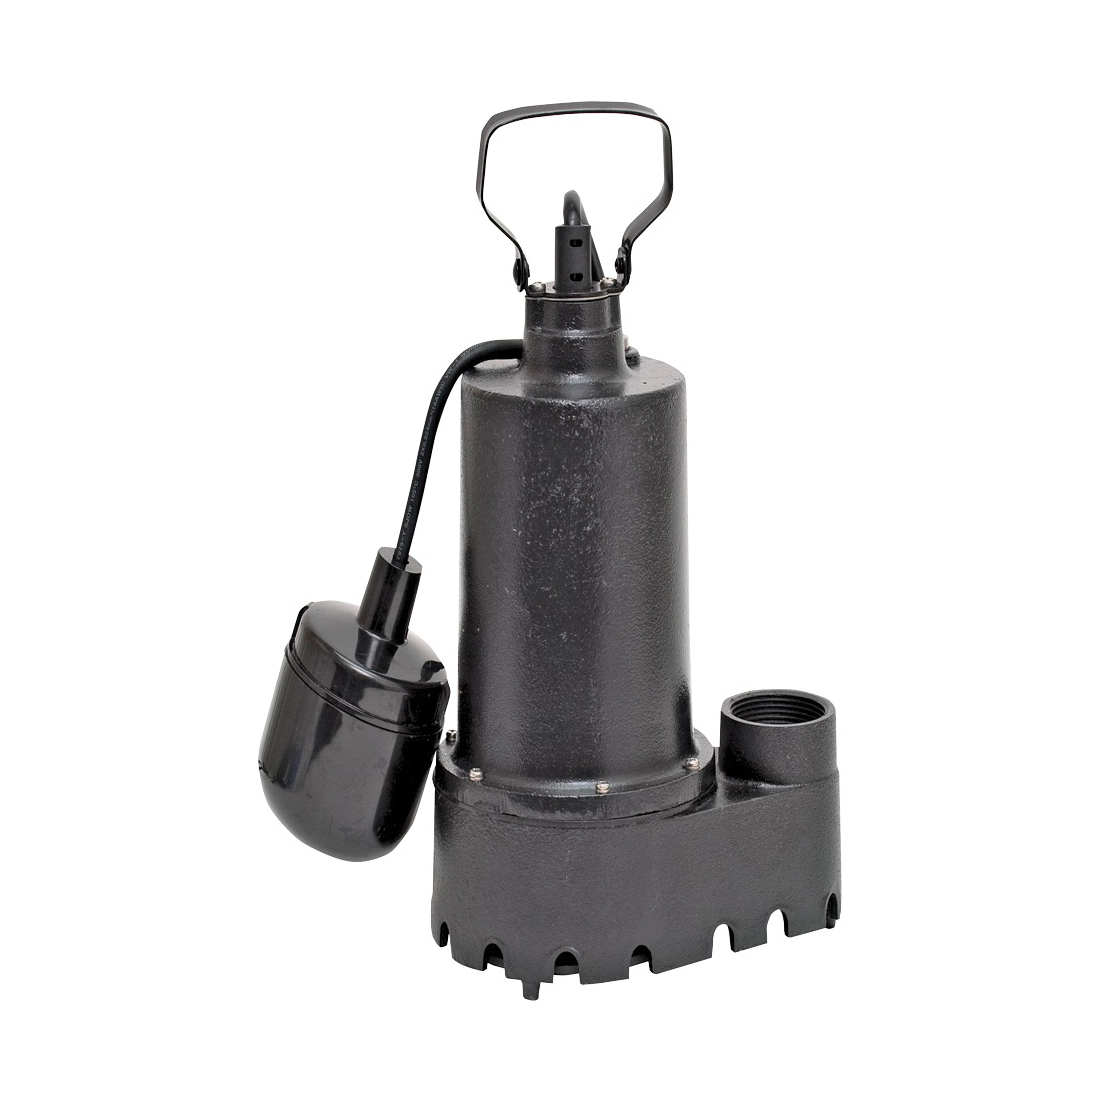 92511 Pump, 7.6 A, 120 V, 0.5 hp, 1-1/2 in Outlet, 25 ft Max Head, 70 gpm, Iron